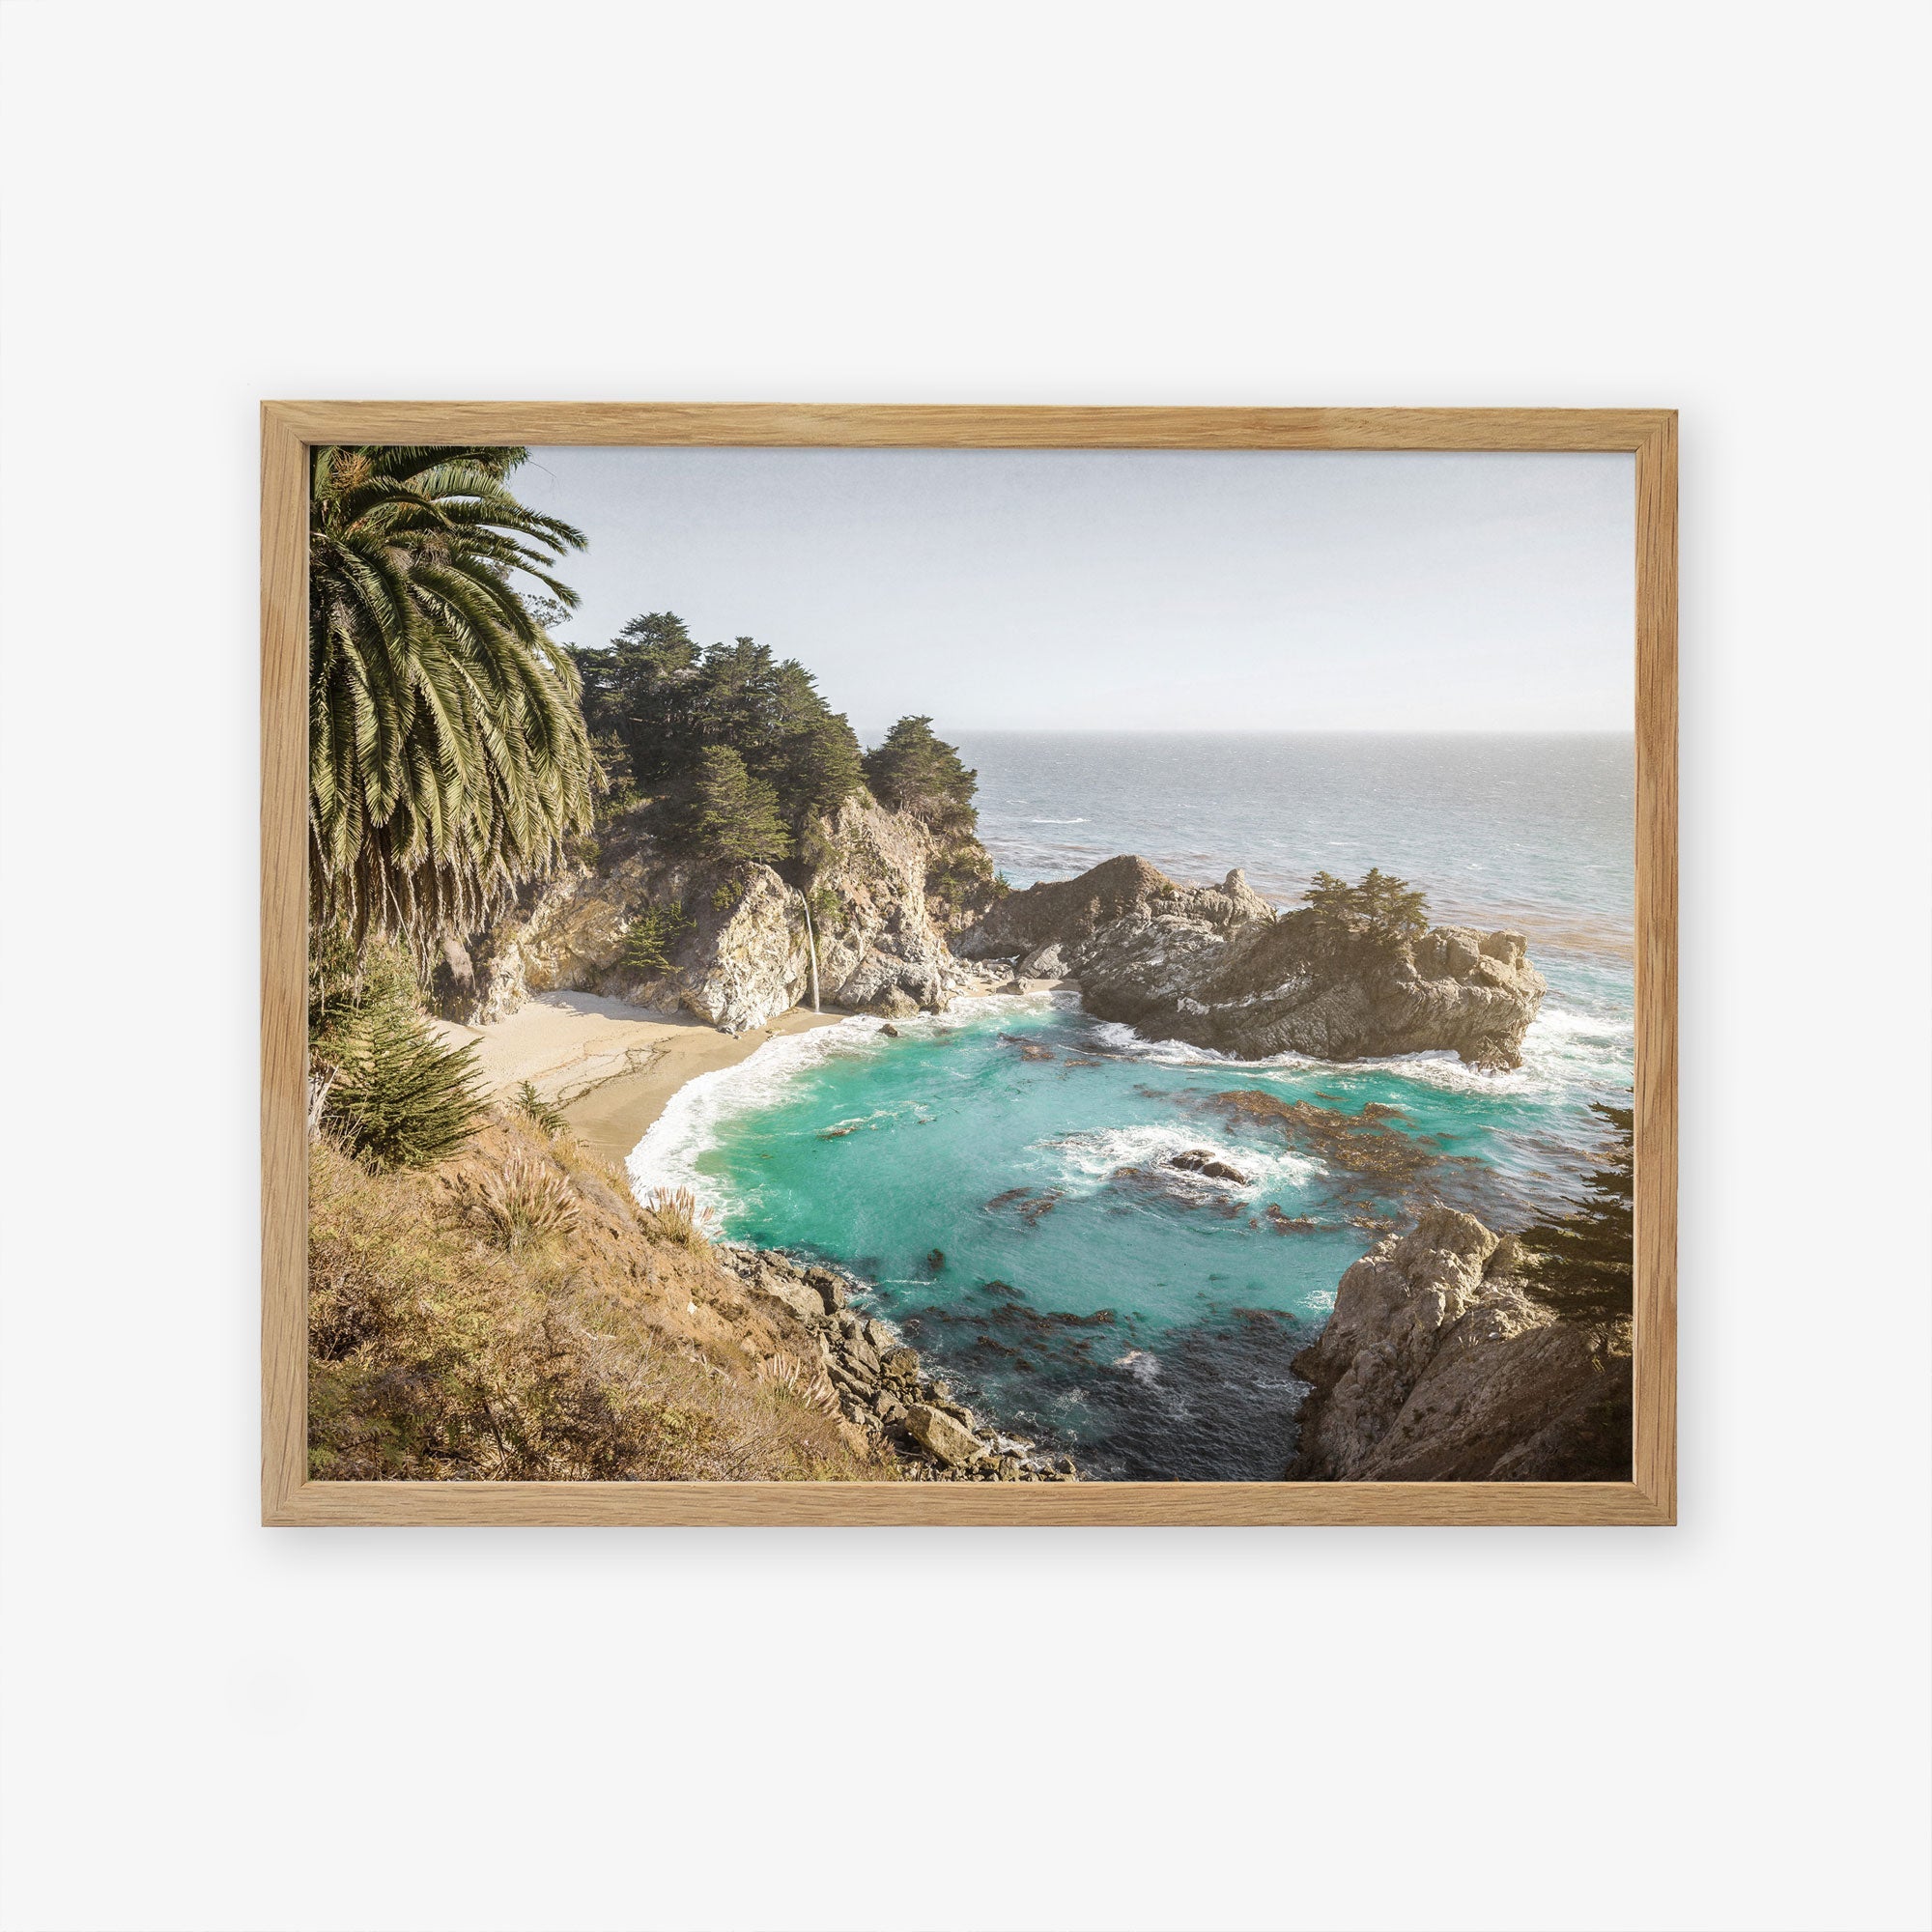 A framed scenic coastal landscape of Big Sur, showcasing a vibrant turquoise sea, rocky cliffs, and lush green trees under a clear blue sky. The product is the Offley Green Big Sur Coastal Print, &#39;Julia Pffeifer&#39;.